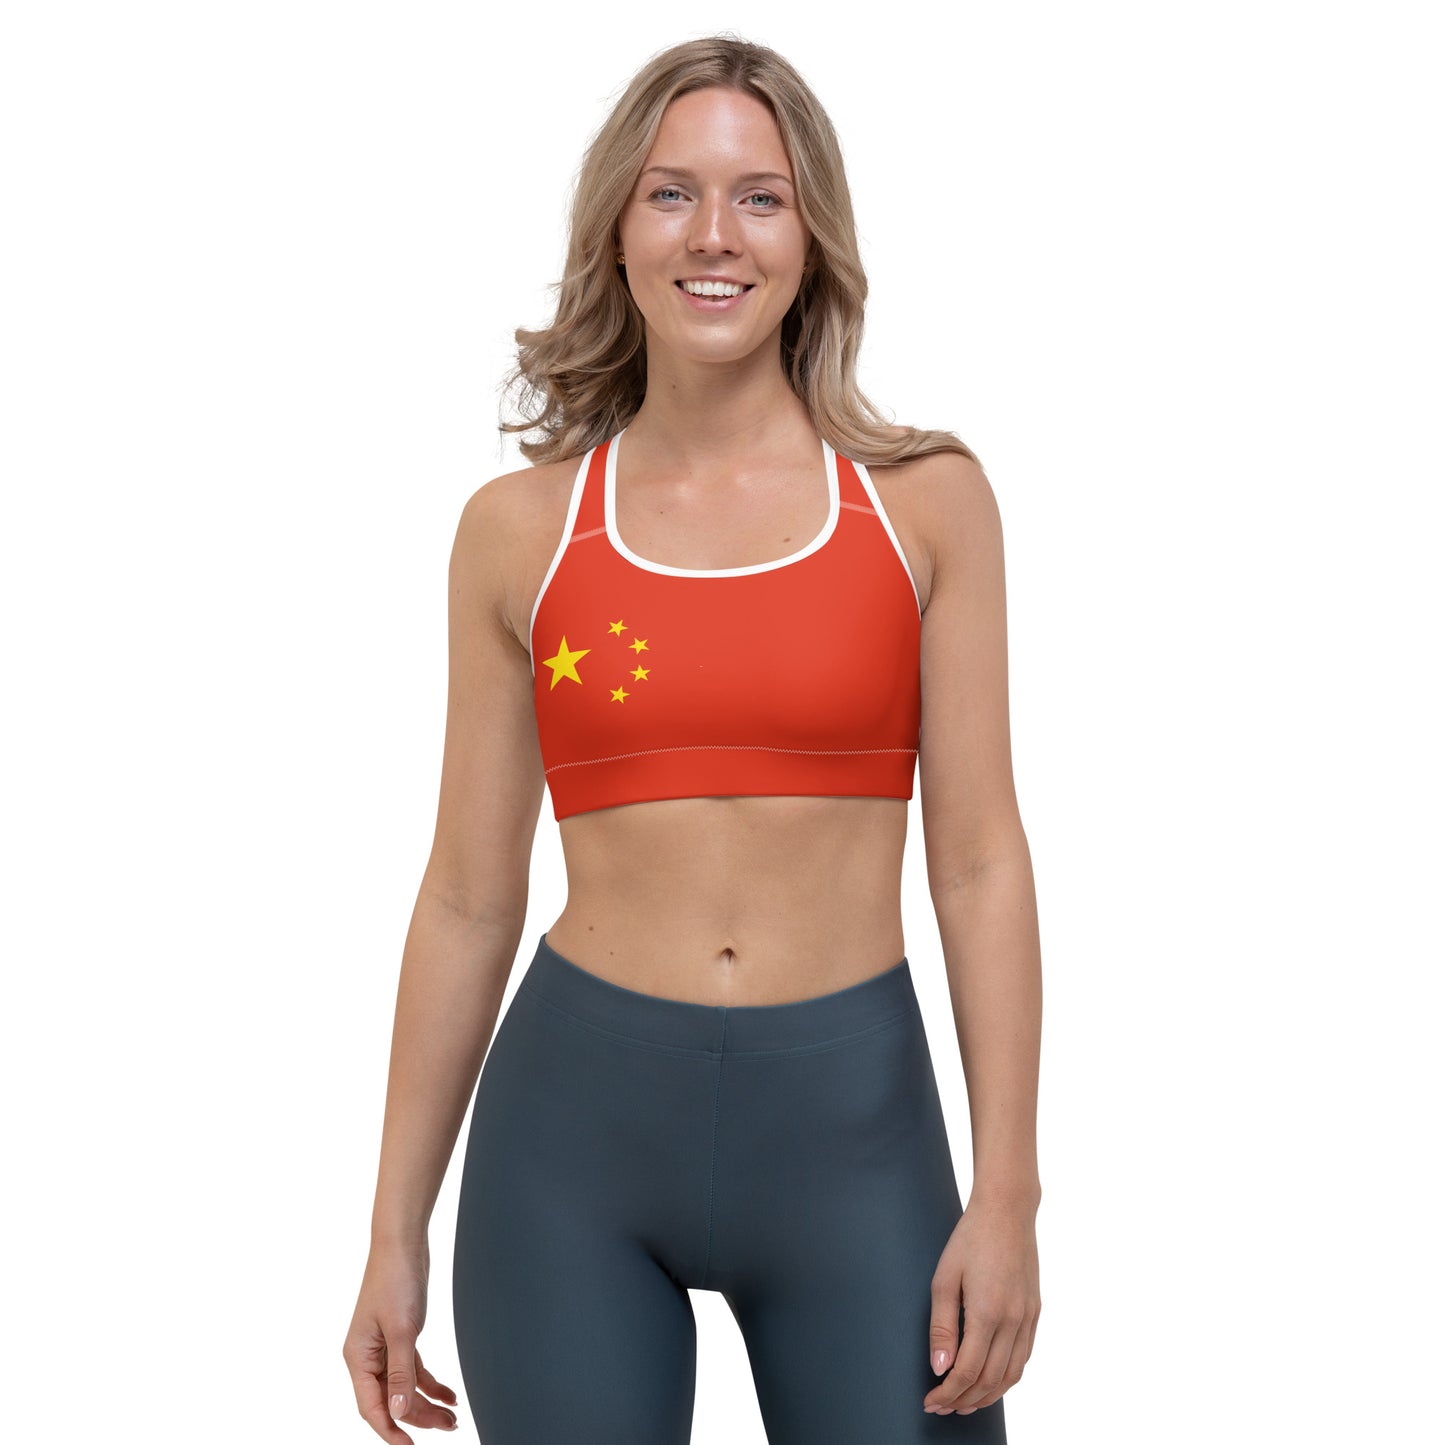 Chinese bra for sports